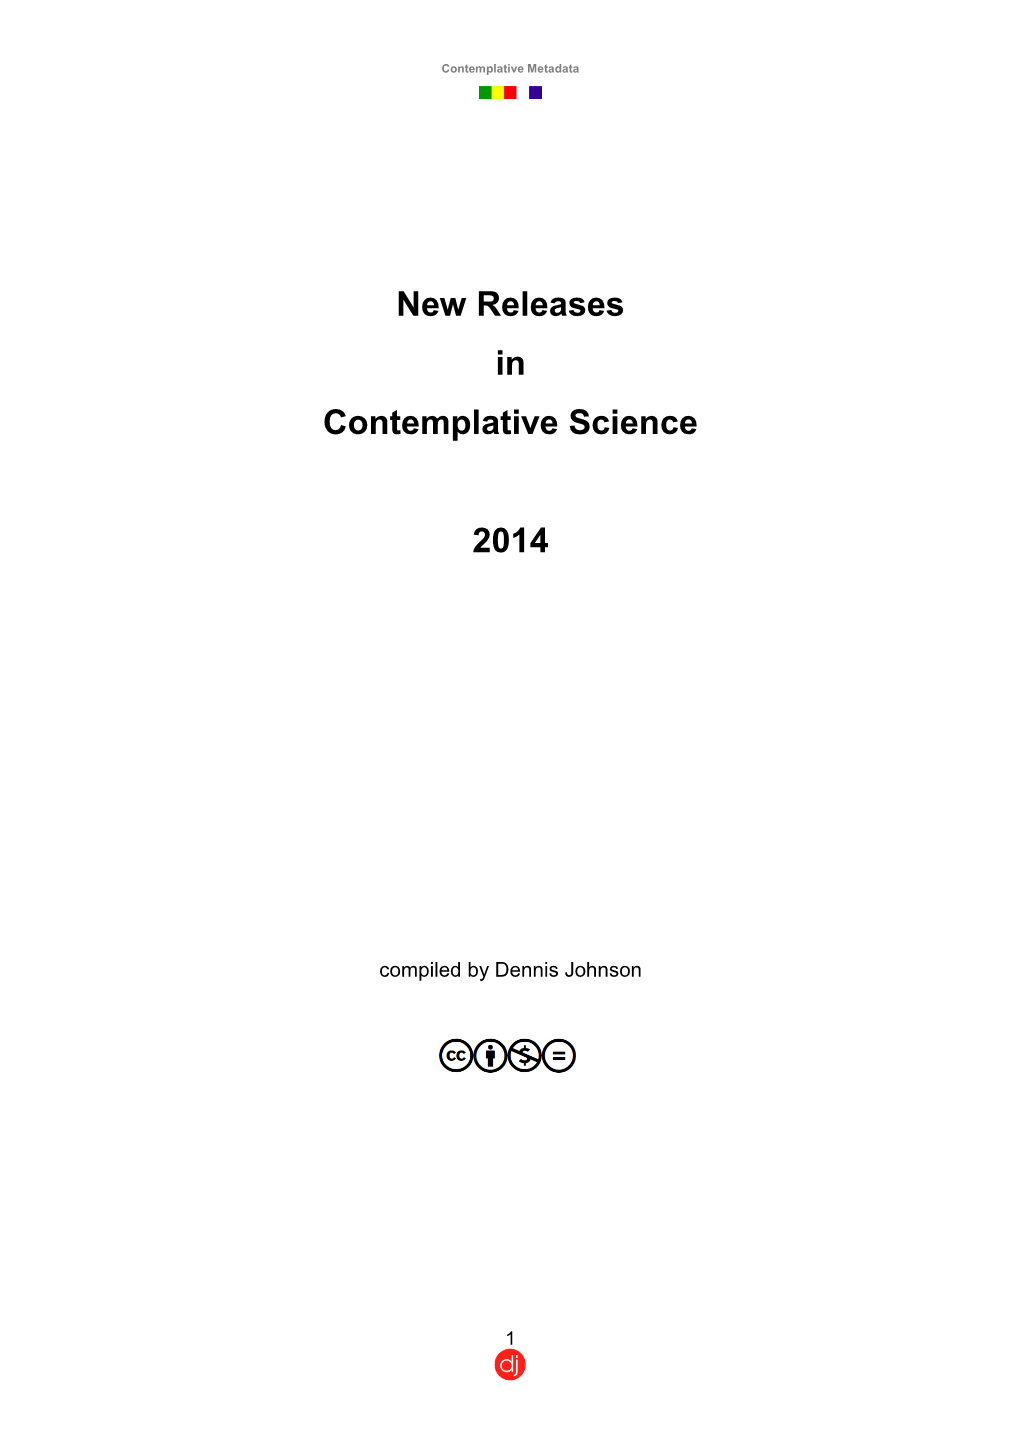 New Releases in Contemplative Science 2014